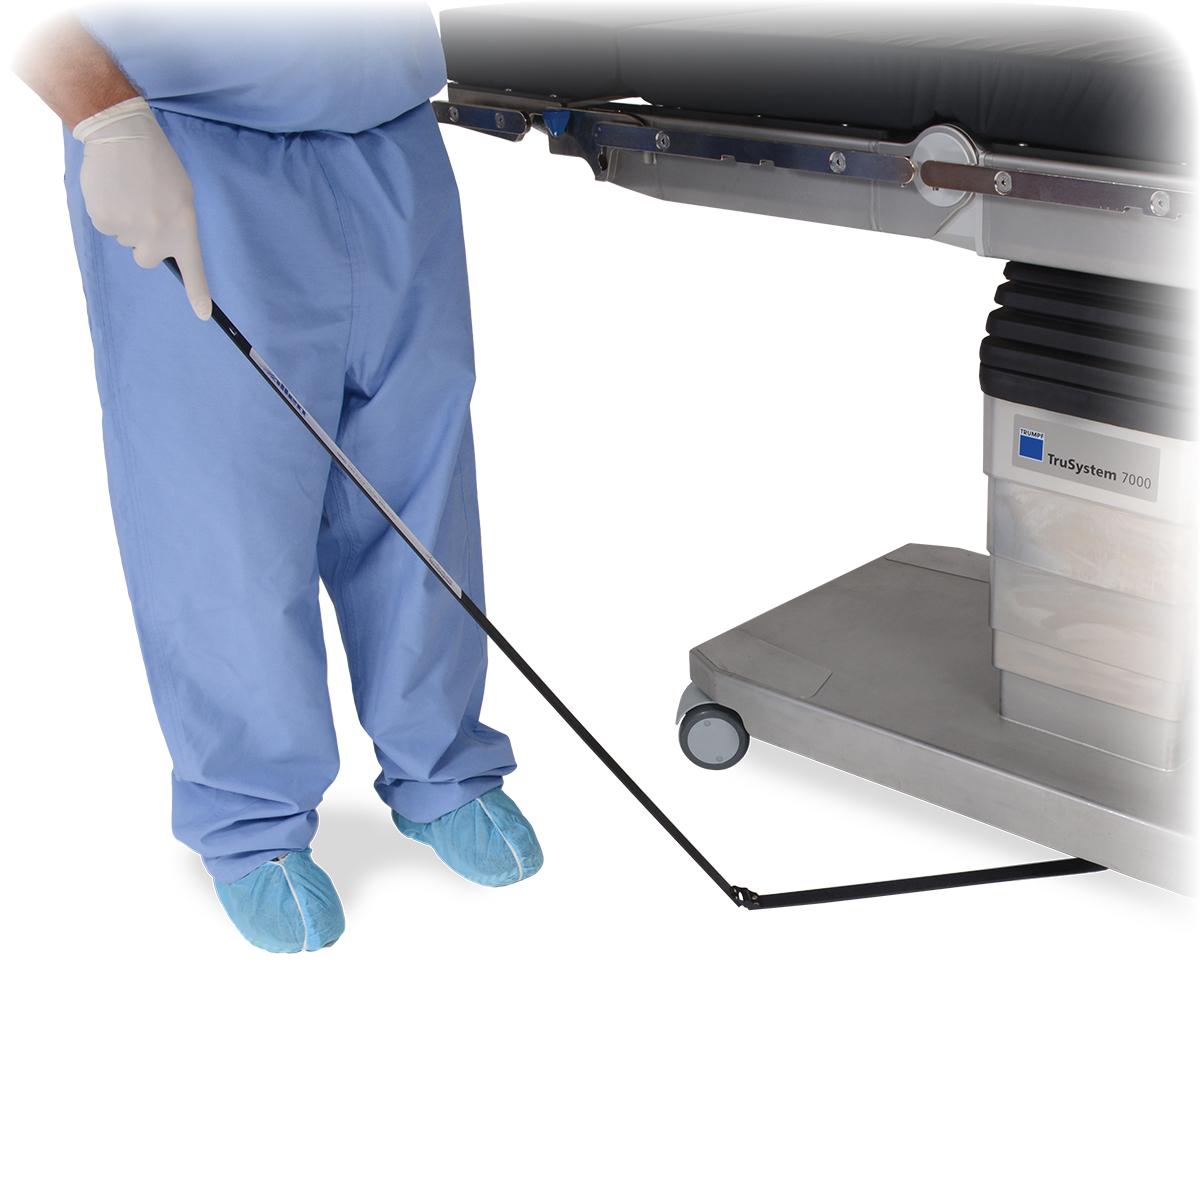 Needle Triever™ Device being swept under OR table by nurse